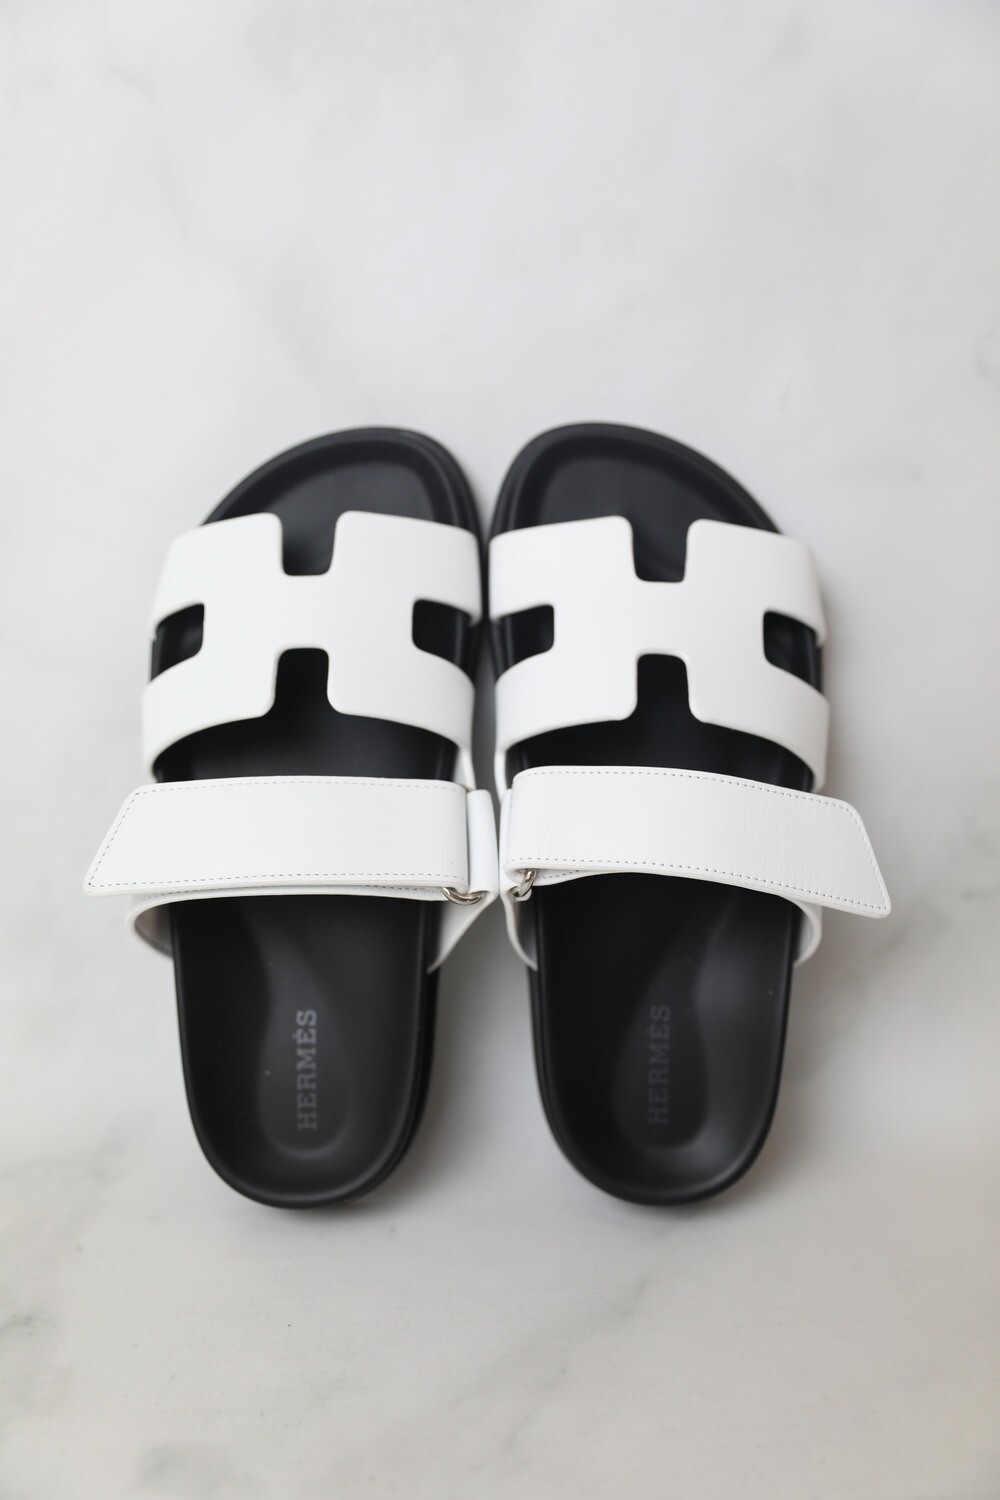 Hermes Chypre Sandals, Size 37.5 White and Black, New in Box WA001